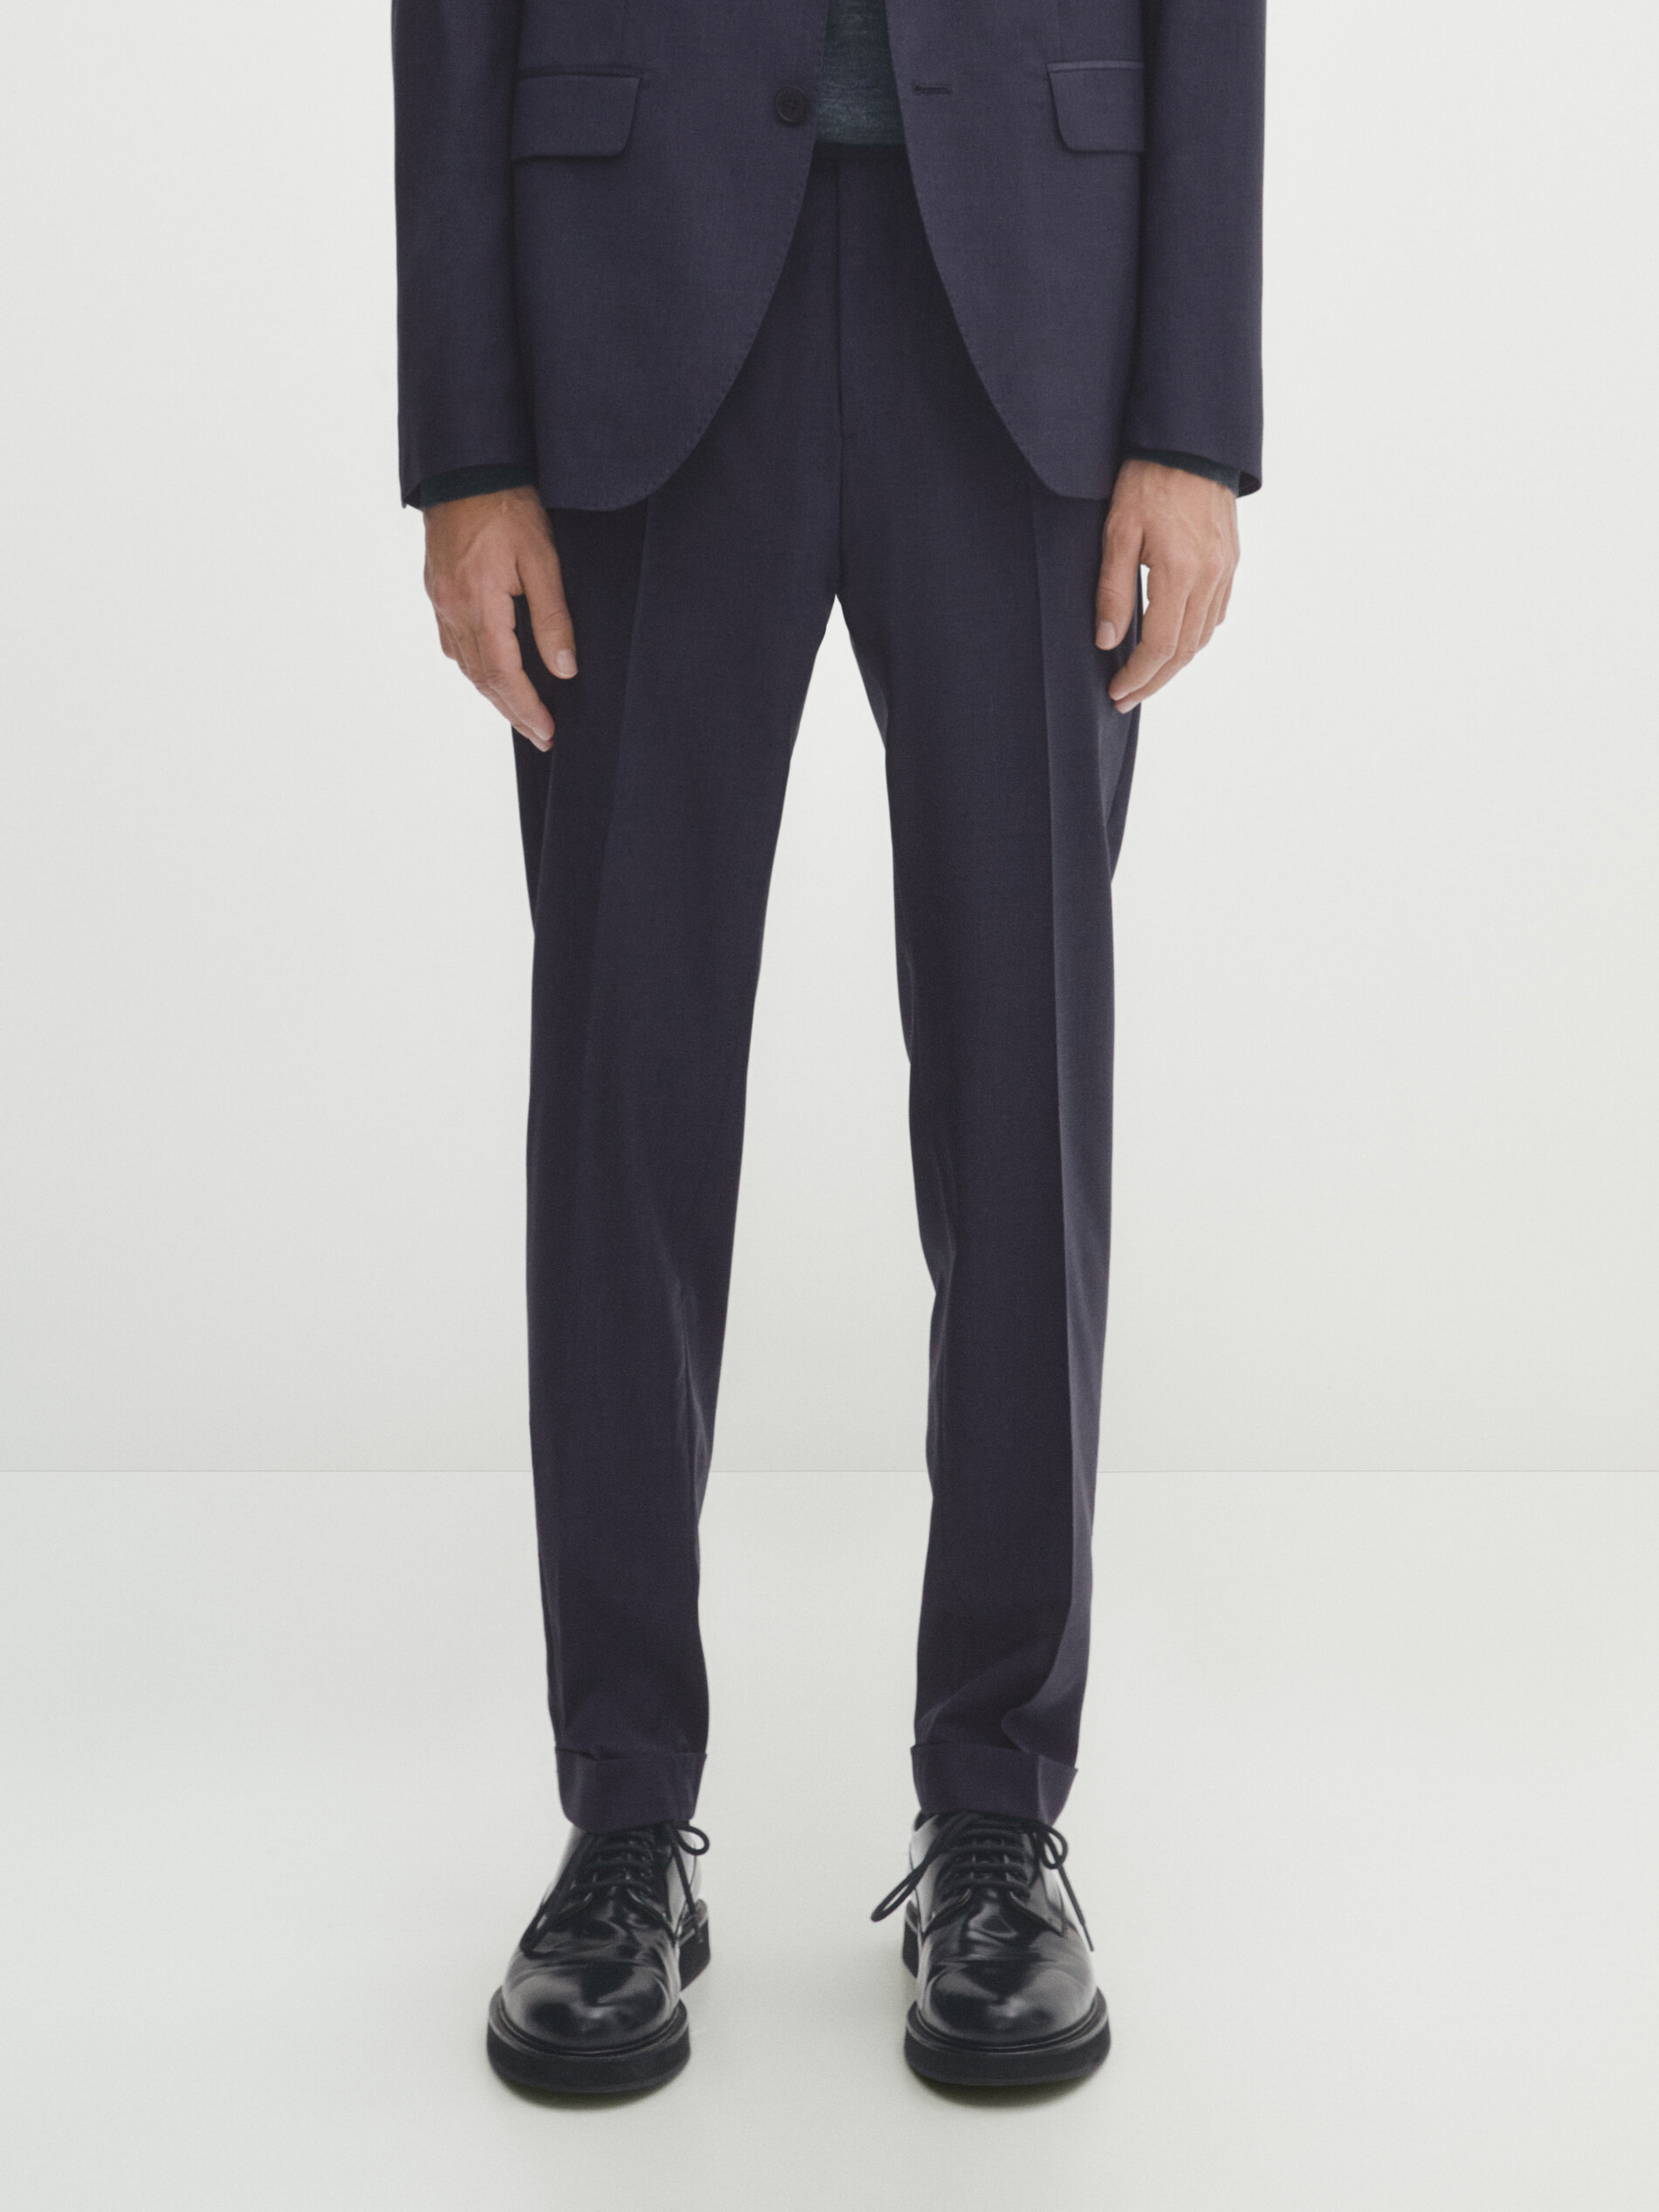 Men's Formal 4 way Stretch Trousers in Navy Blue Slim Fit